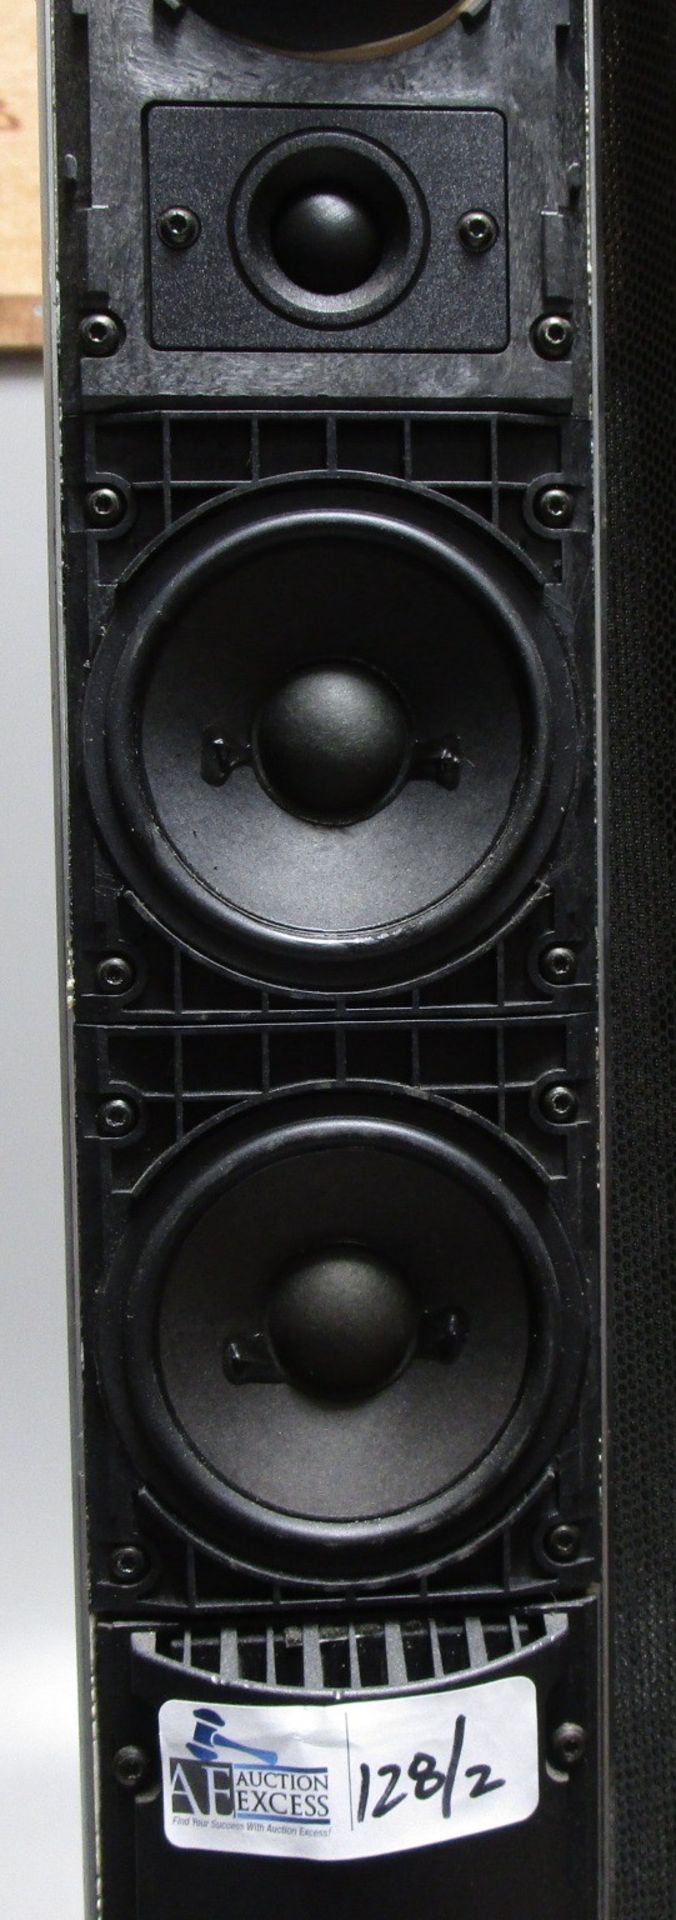 LOT OF 2 BANG & OLUFSEN MCMXC11 SPEAKERS TESTED AND WORKING - Image 4 of 5